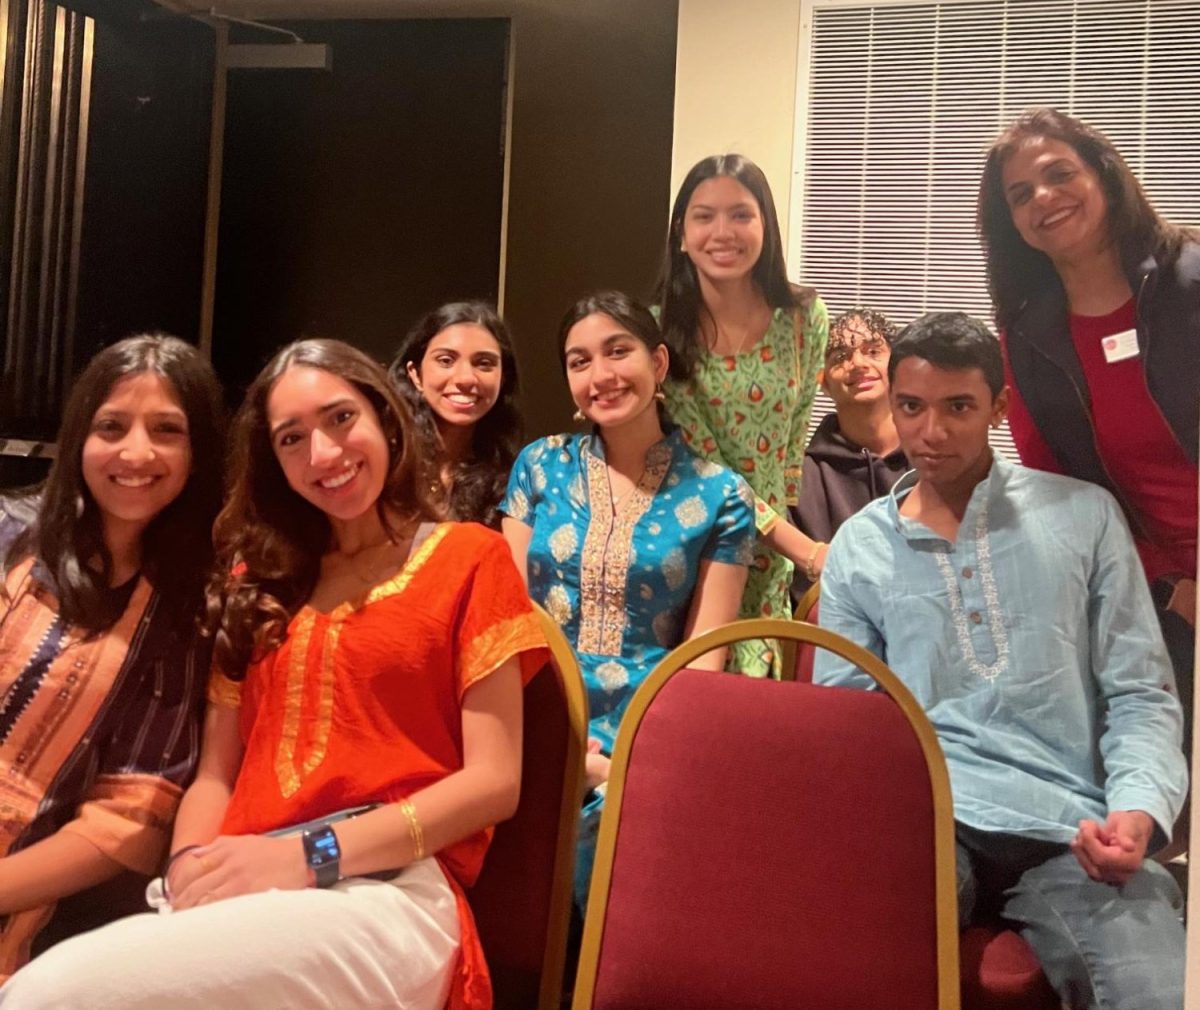 “It was fun and entertaining in an unexpected way,” freshman SAAG member Mira Pemmanda said. “It was the perfect representation of our vibrant Indian culture.”